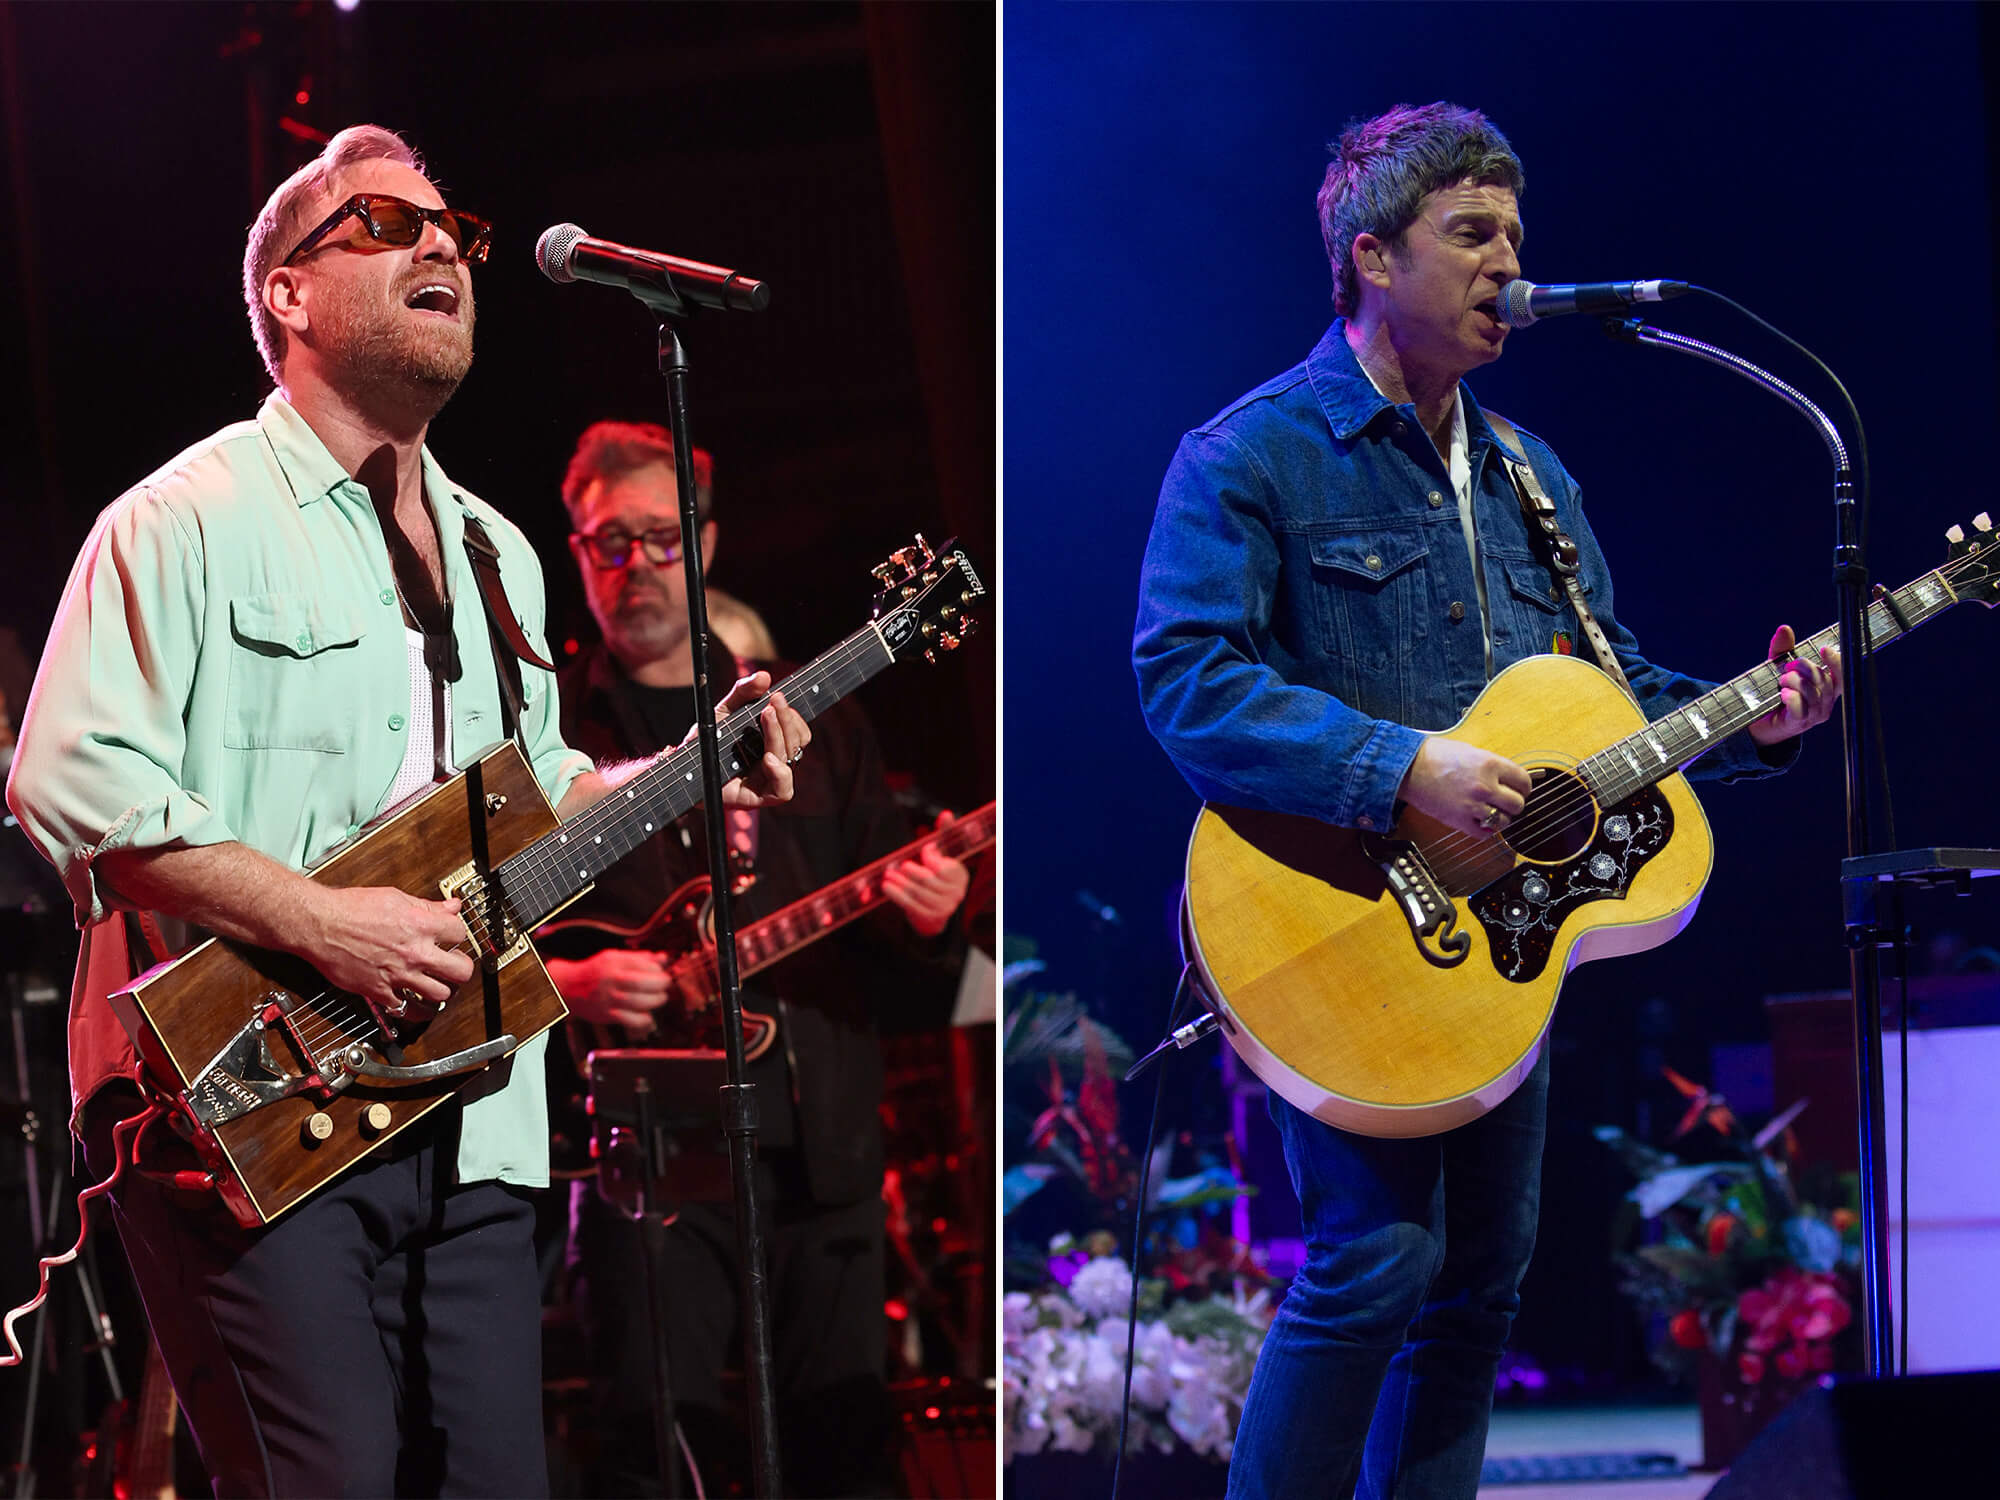 Dan Auerbach (left) and Noel Gallagher (right). Both are photographed on stage. Dan is playing an electric guitar, and Noel is playing a Gibson acoustic.